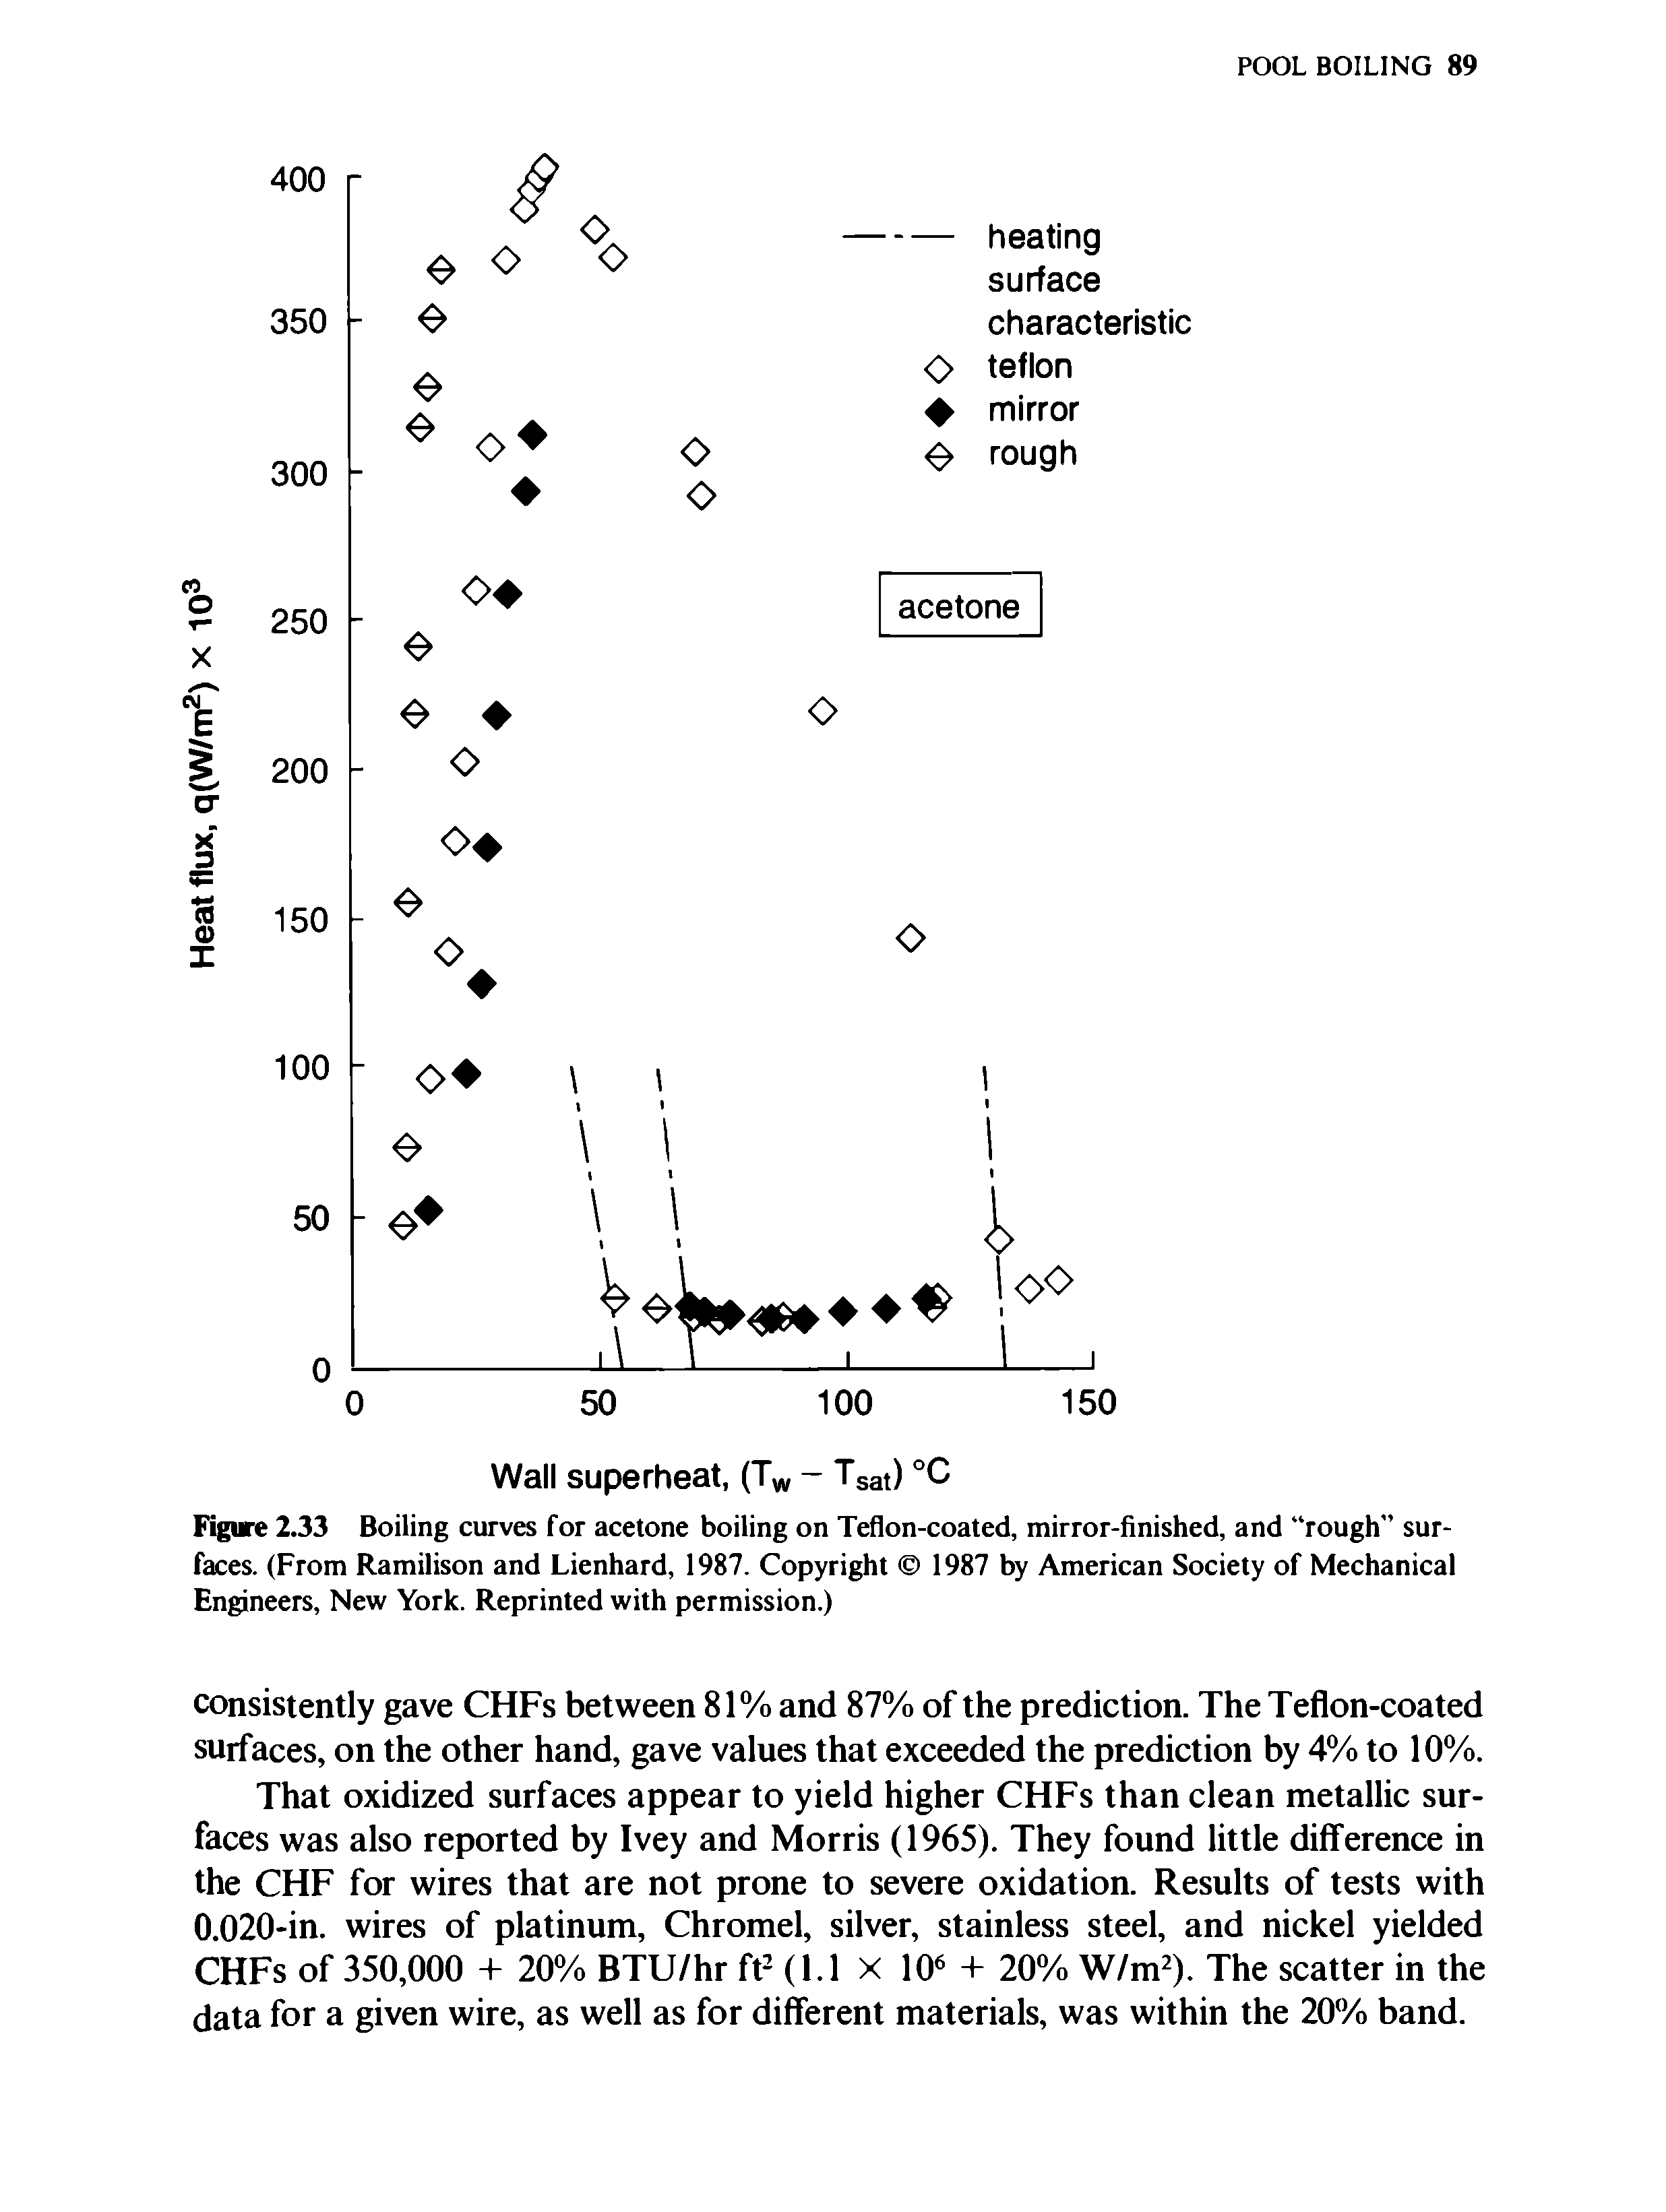 Figure 2.33 Boiling curves for acetone boiling on Teflon-coated, mirror-finished, and rough surfaces. (From Ramilison and Lienhard, 1987. Copyright 1987 by American Society of Mechanical Engineers, New York. Reprinted with permission.)...